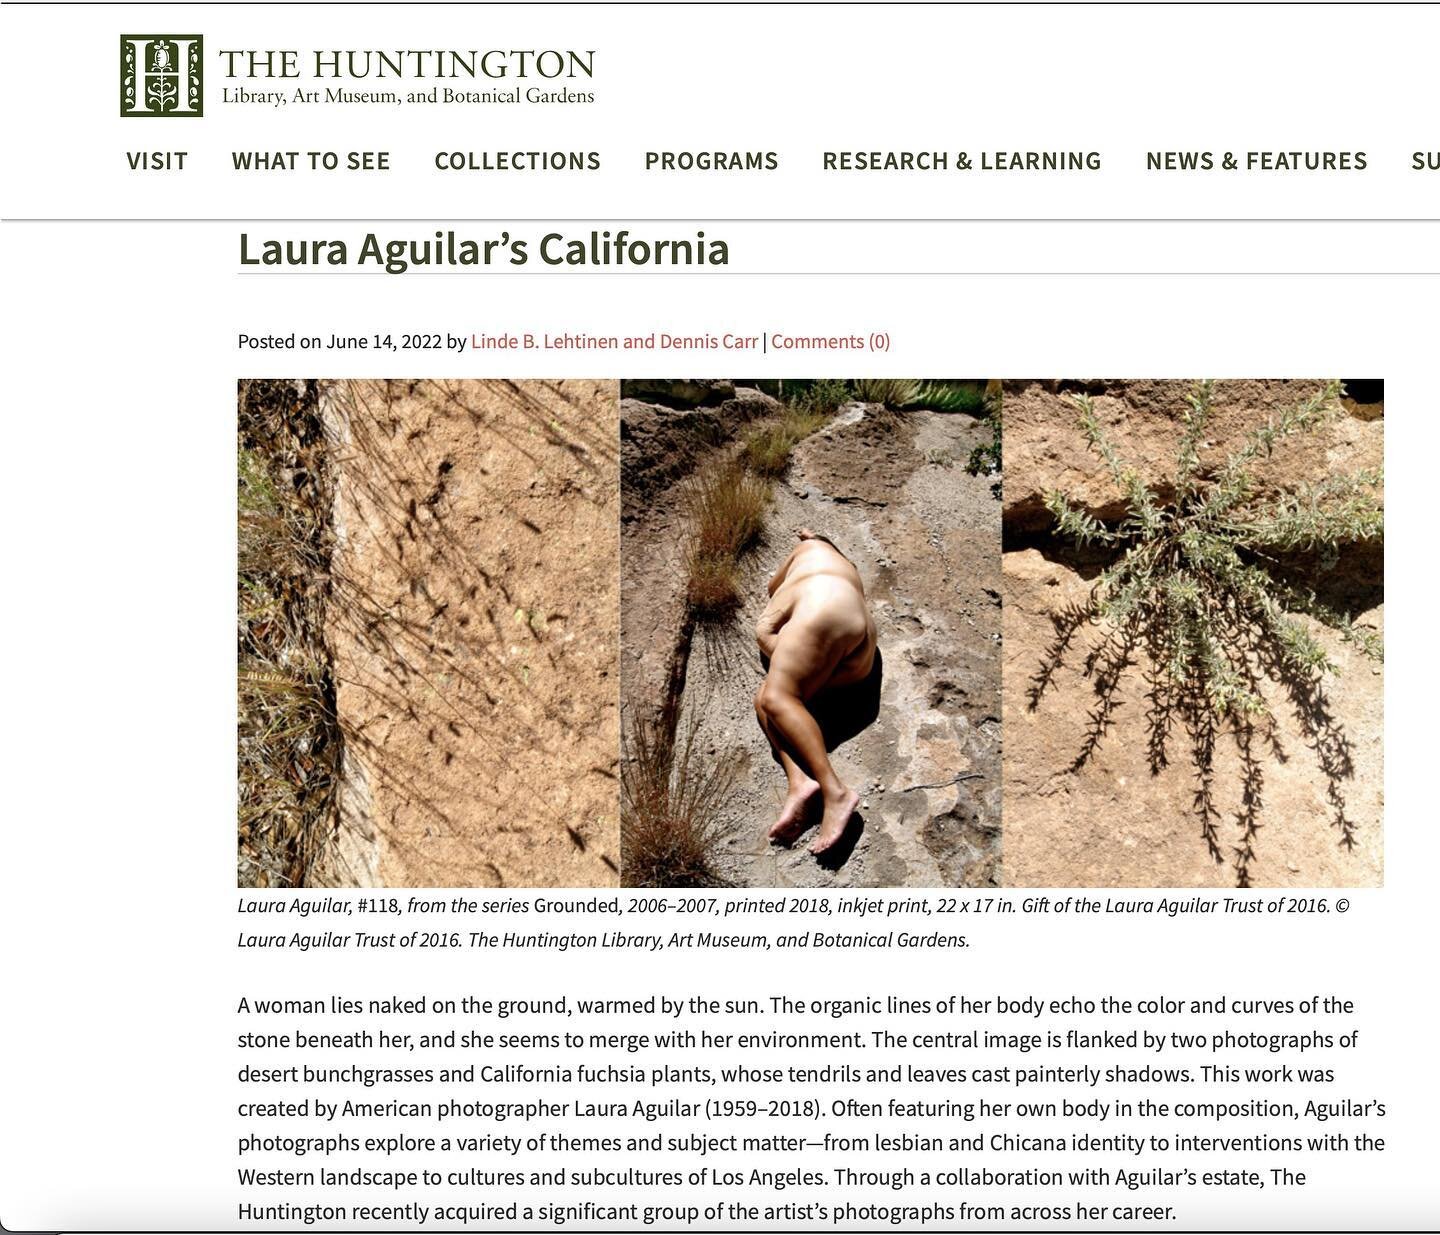 Huge acquisition news! 

The Huntington Library, Art Museum and Gardens has acquired 24 major works of Laura Aguilar! One of them is &ldquo;In Sandy&rsquo;s Room&rdquo; which was shown at the Huntington back in 2008. 

Also, the collection has the la